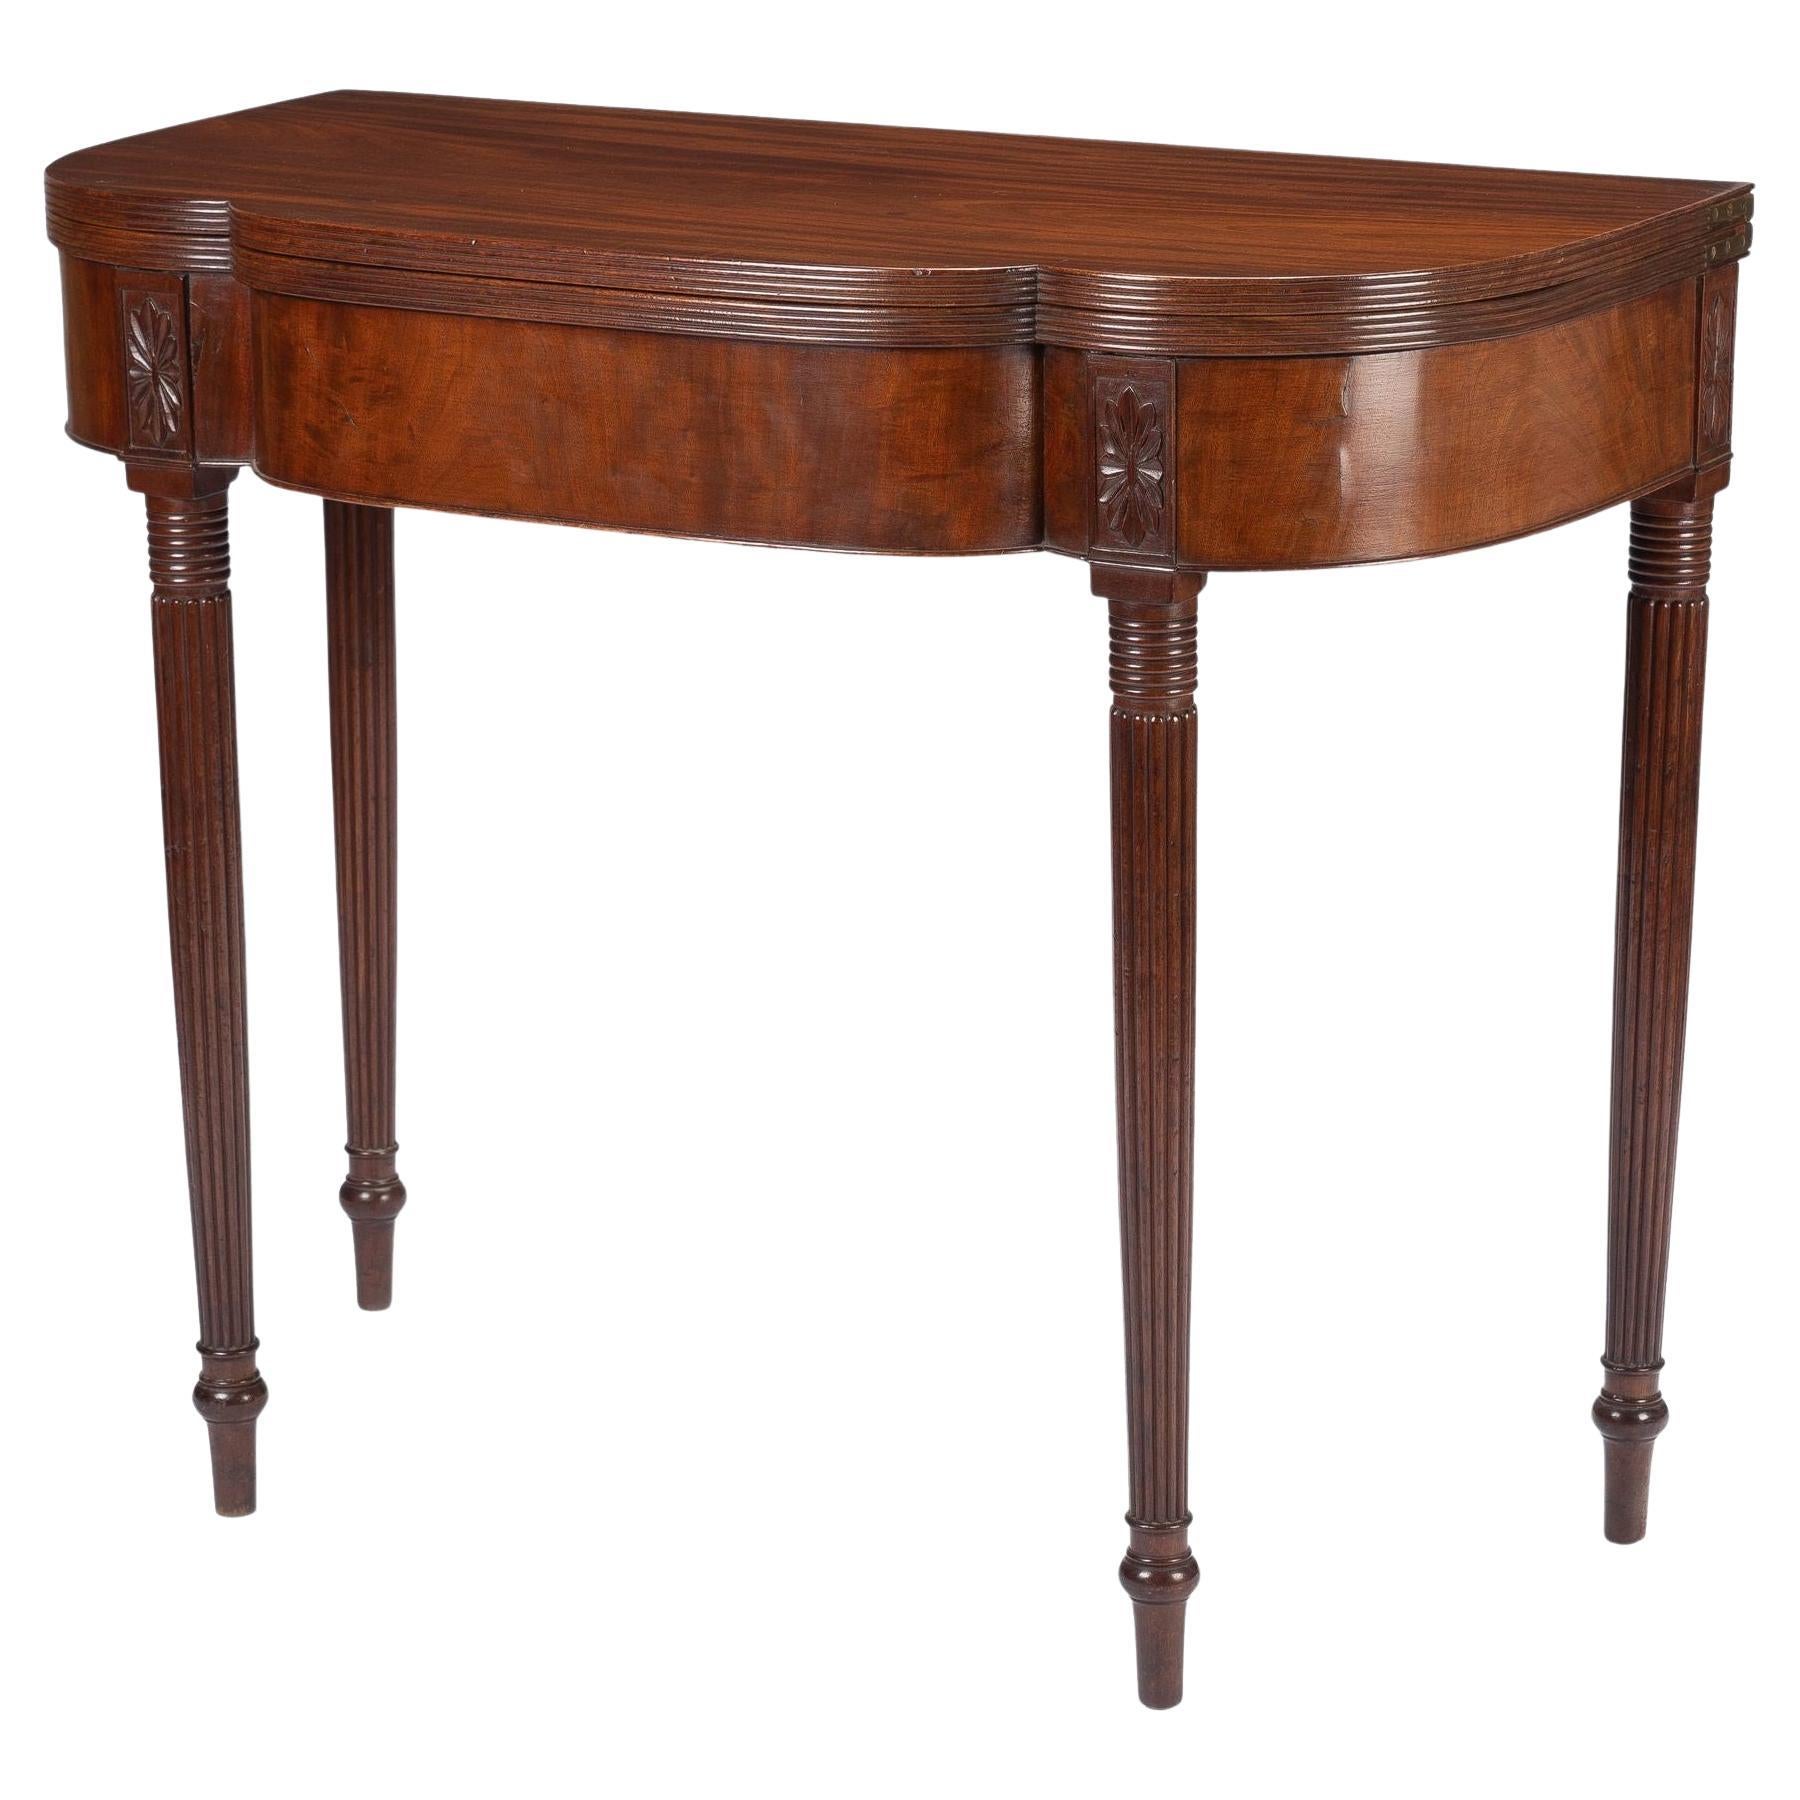 New Jersey Cherry Flip Top Game Table, c. 1795